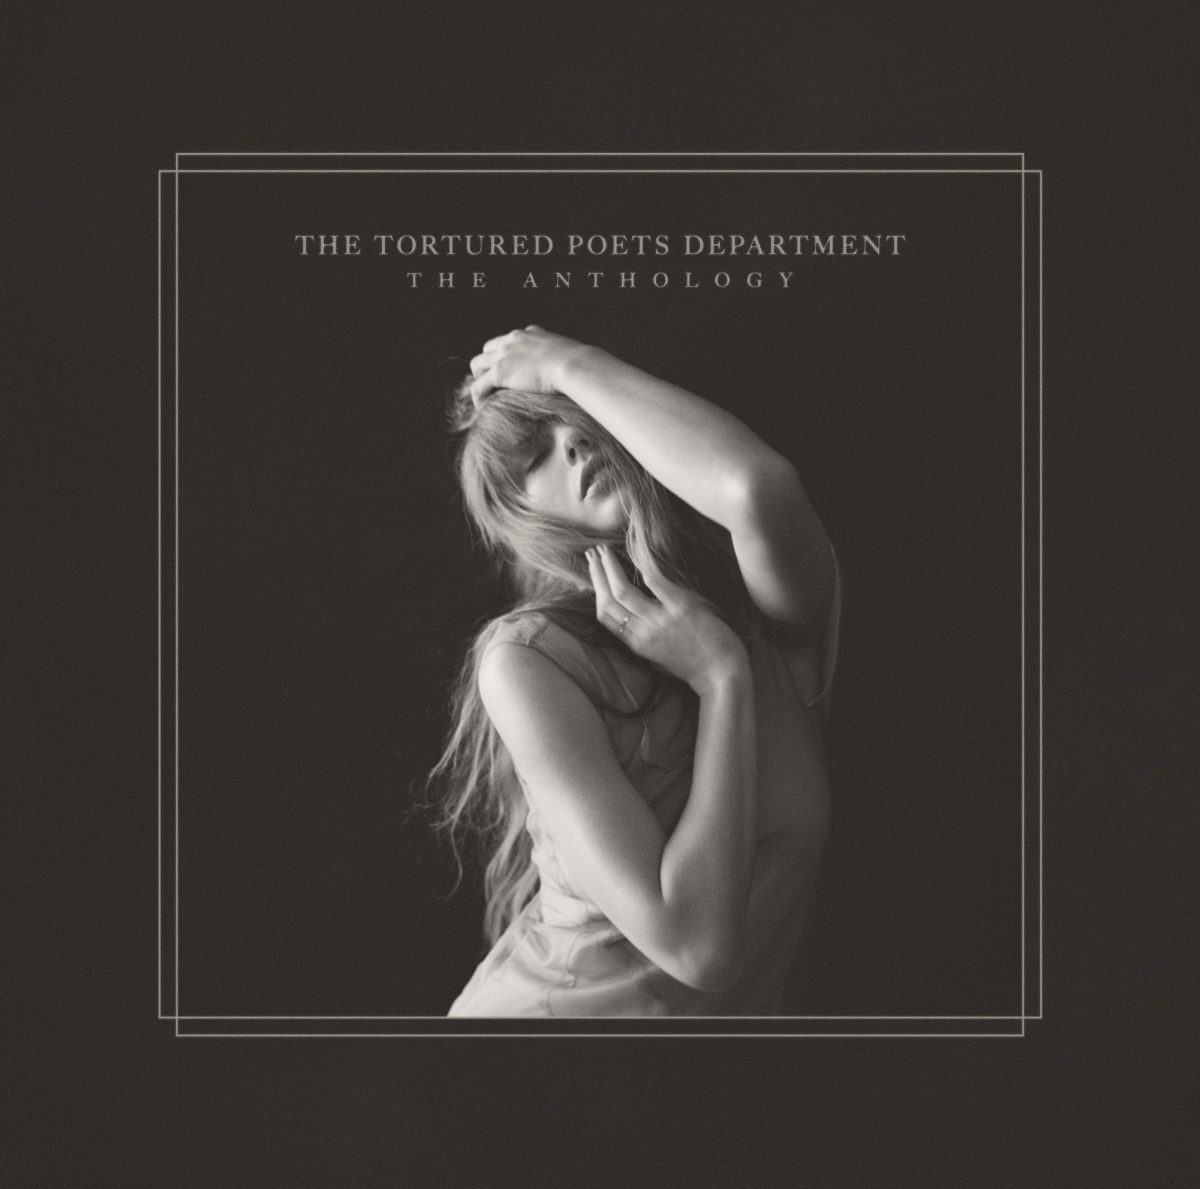 THE TORTURED POETS DEPARTMENT: THE ANTHOLOGY album cover. This served as a double album that was release at 2 A.M. Photo courtesy of fair use laws.  